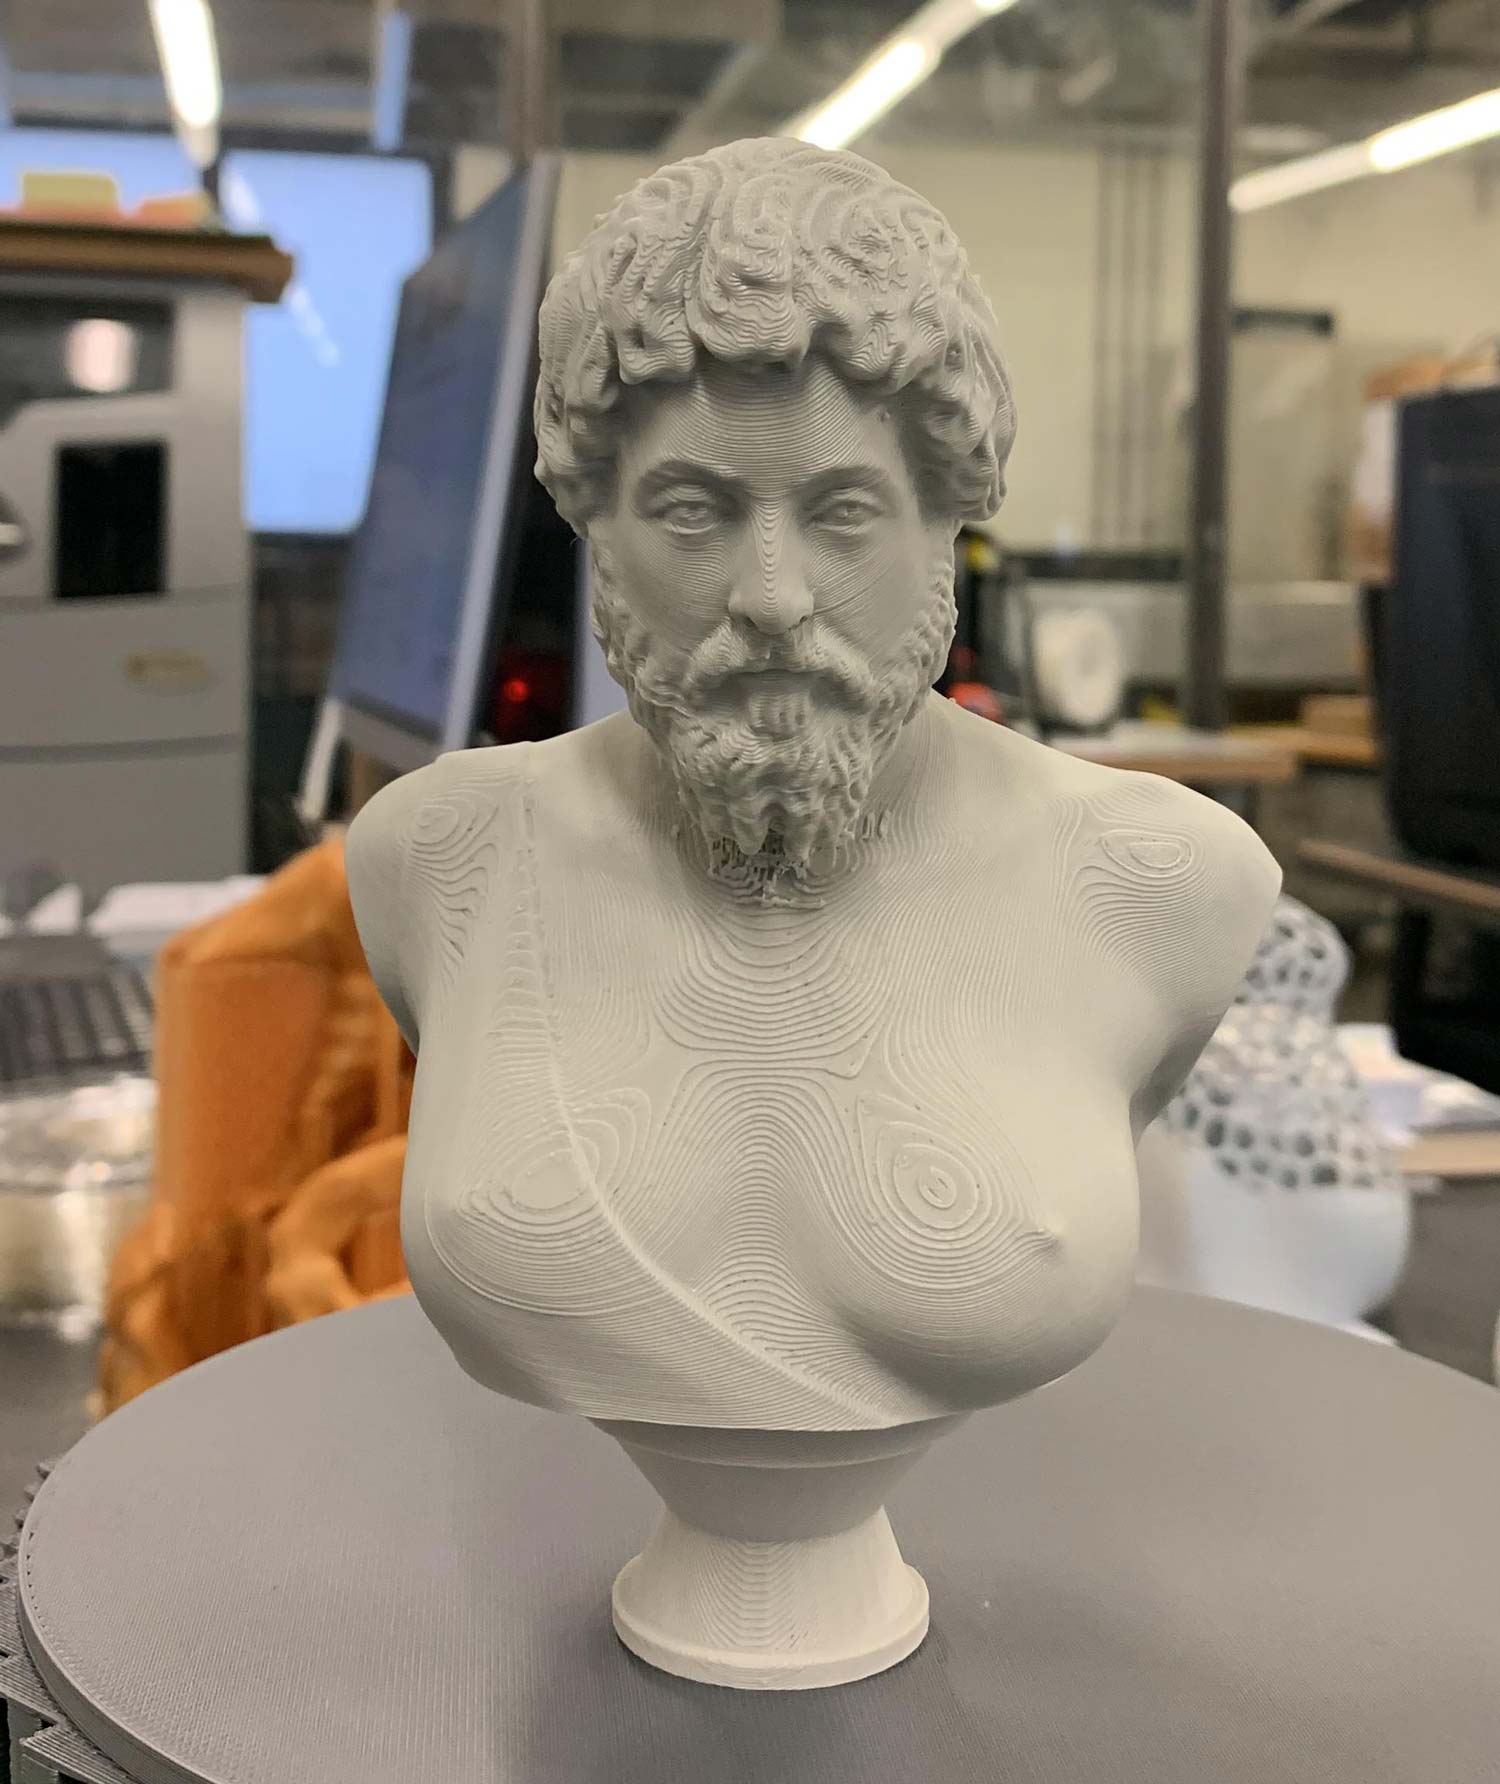 A Busty Bust of Marcus Aurelius (Gift from a classmate)